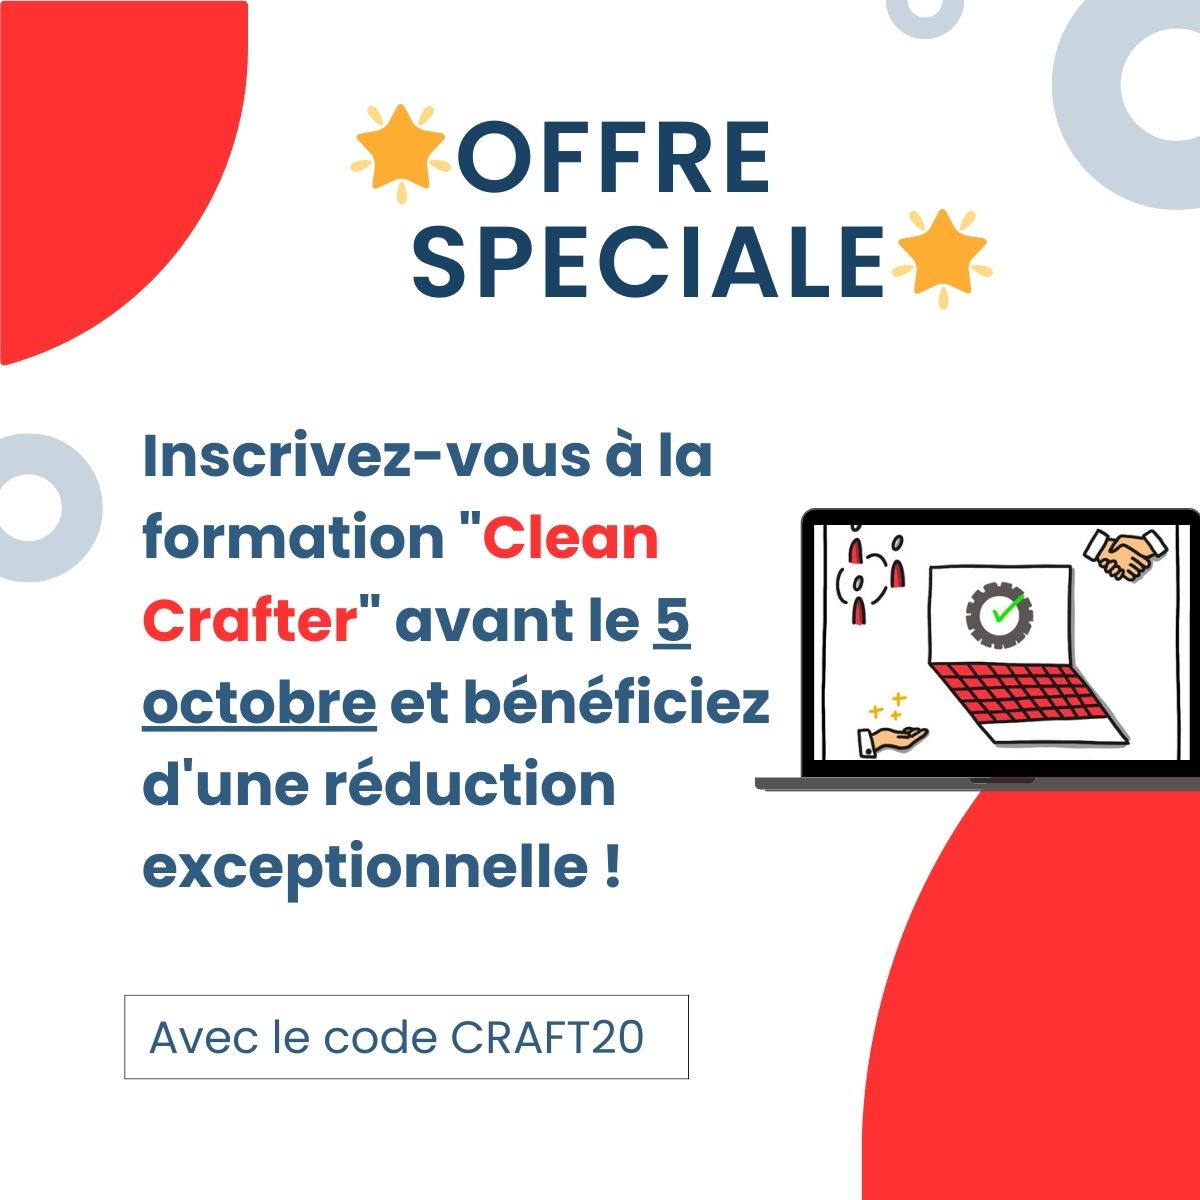 🌟Offre spEciale🌟